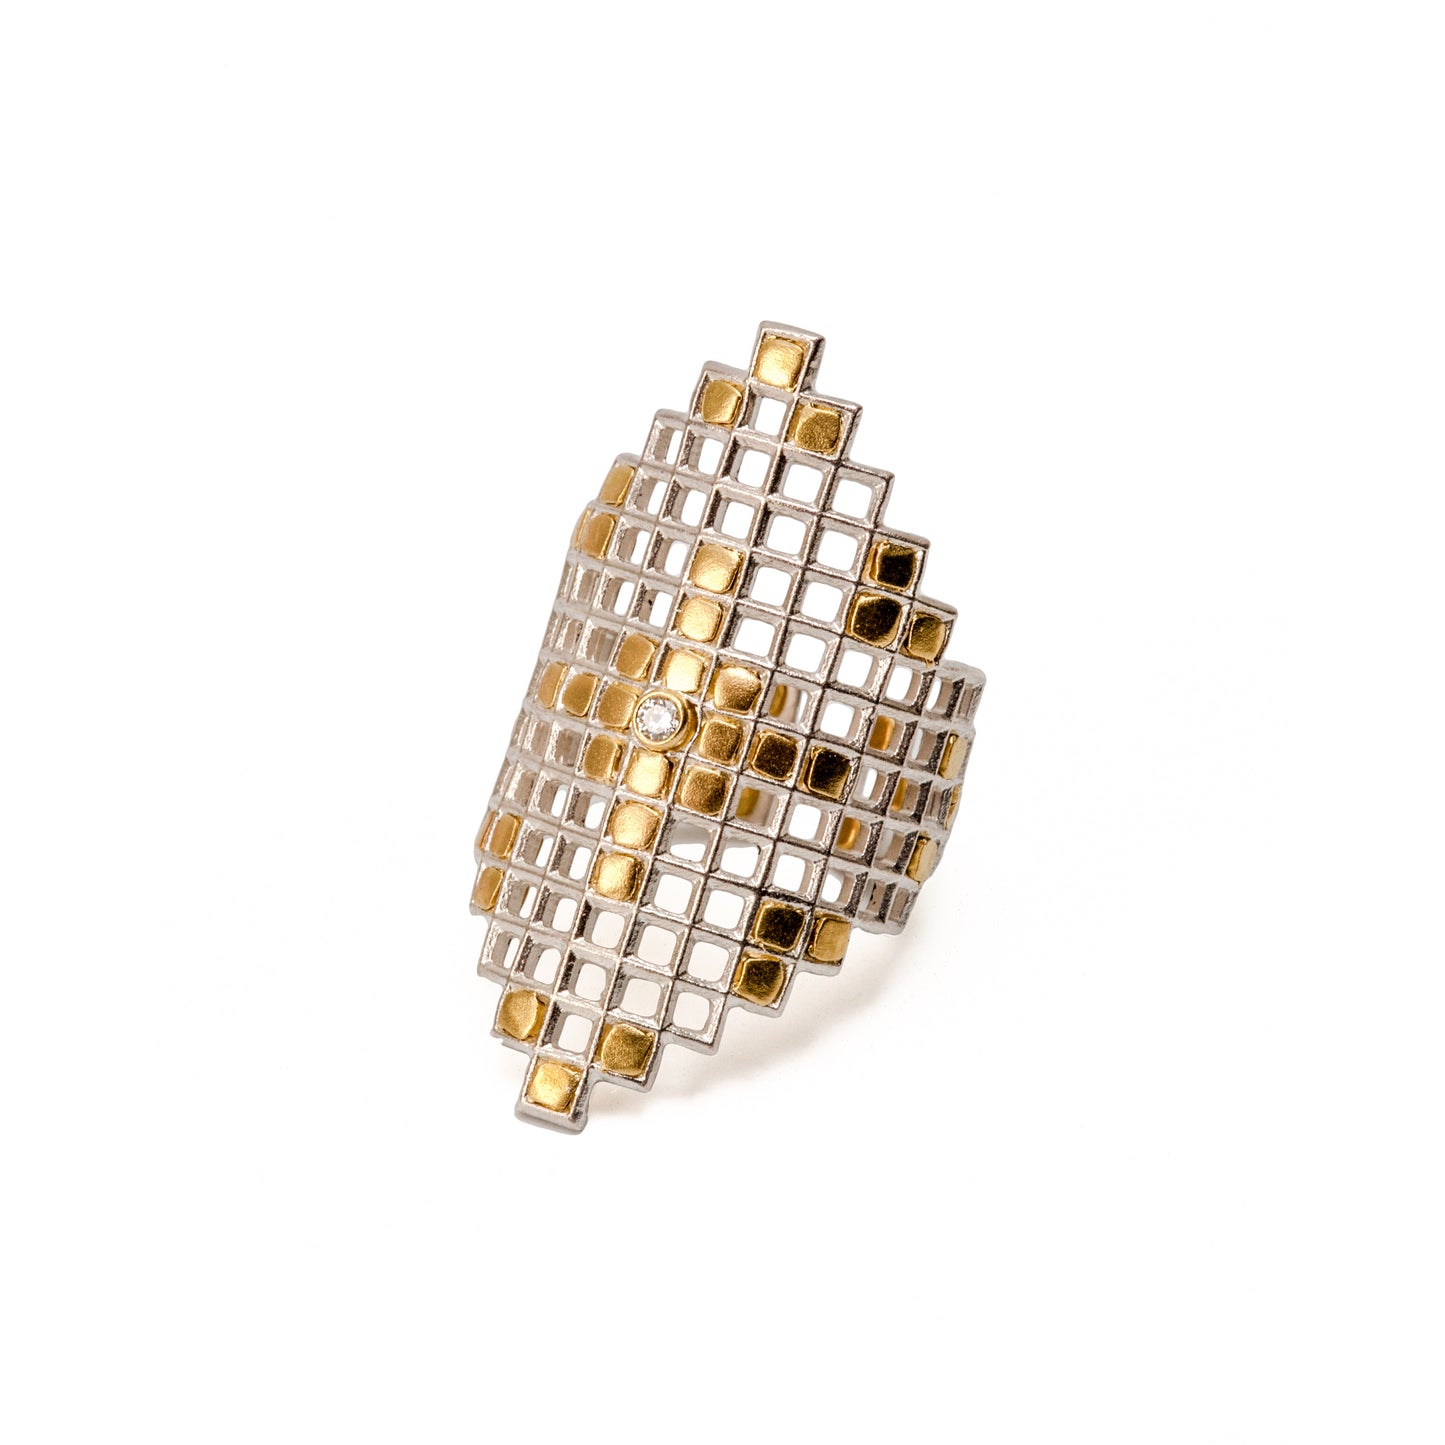 Lattice Ring with 18K Gold Rivets; Zia Pattern